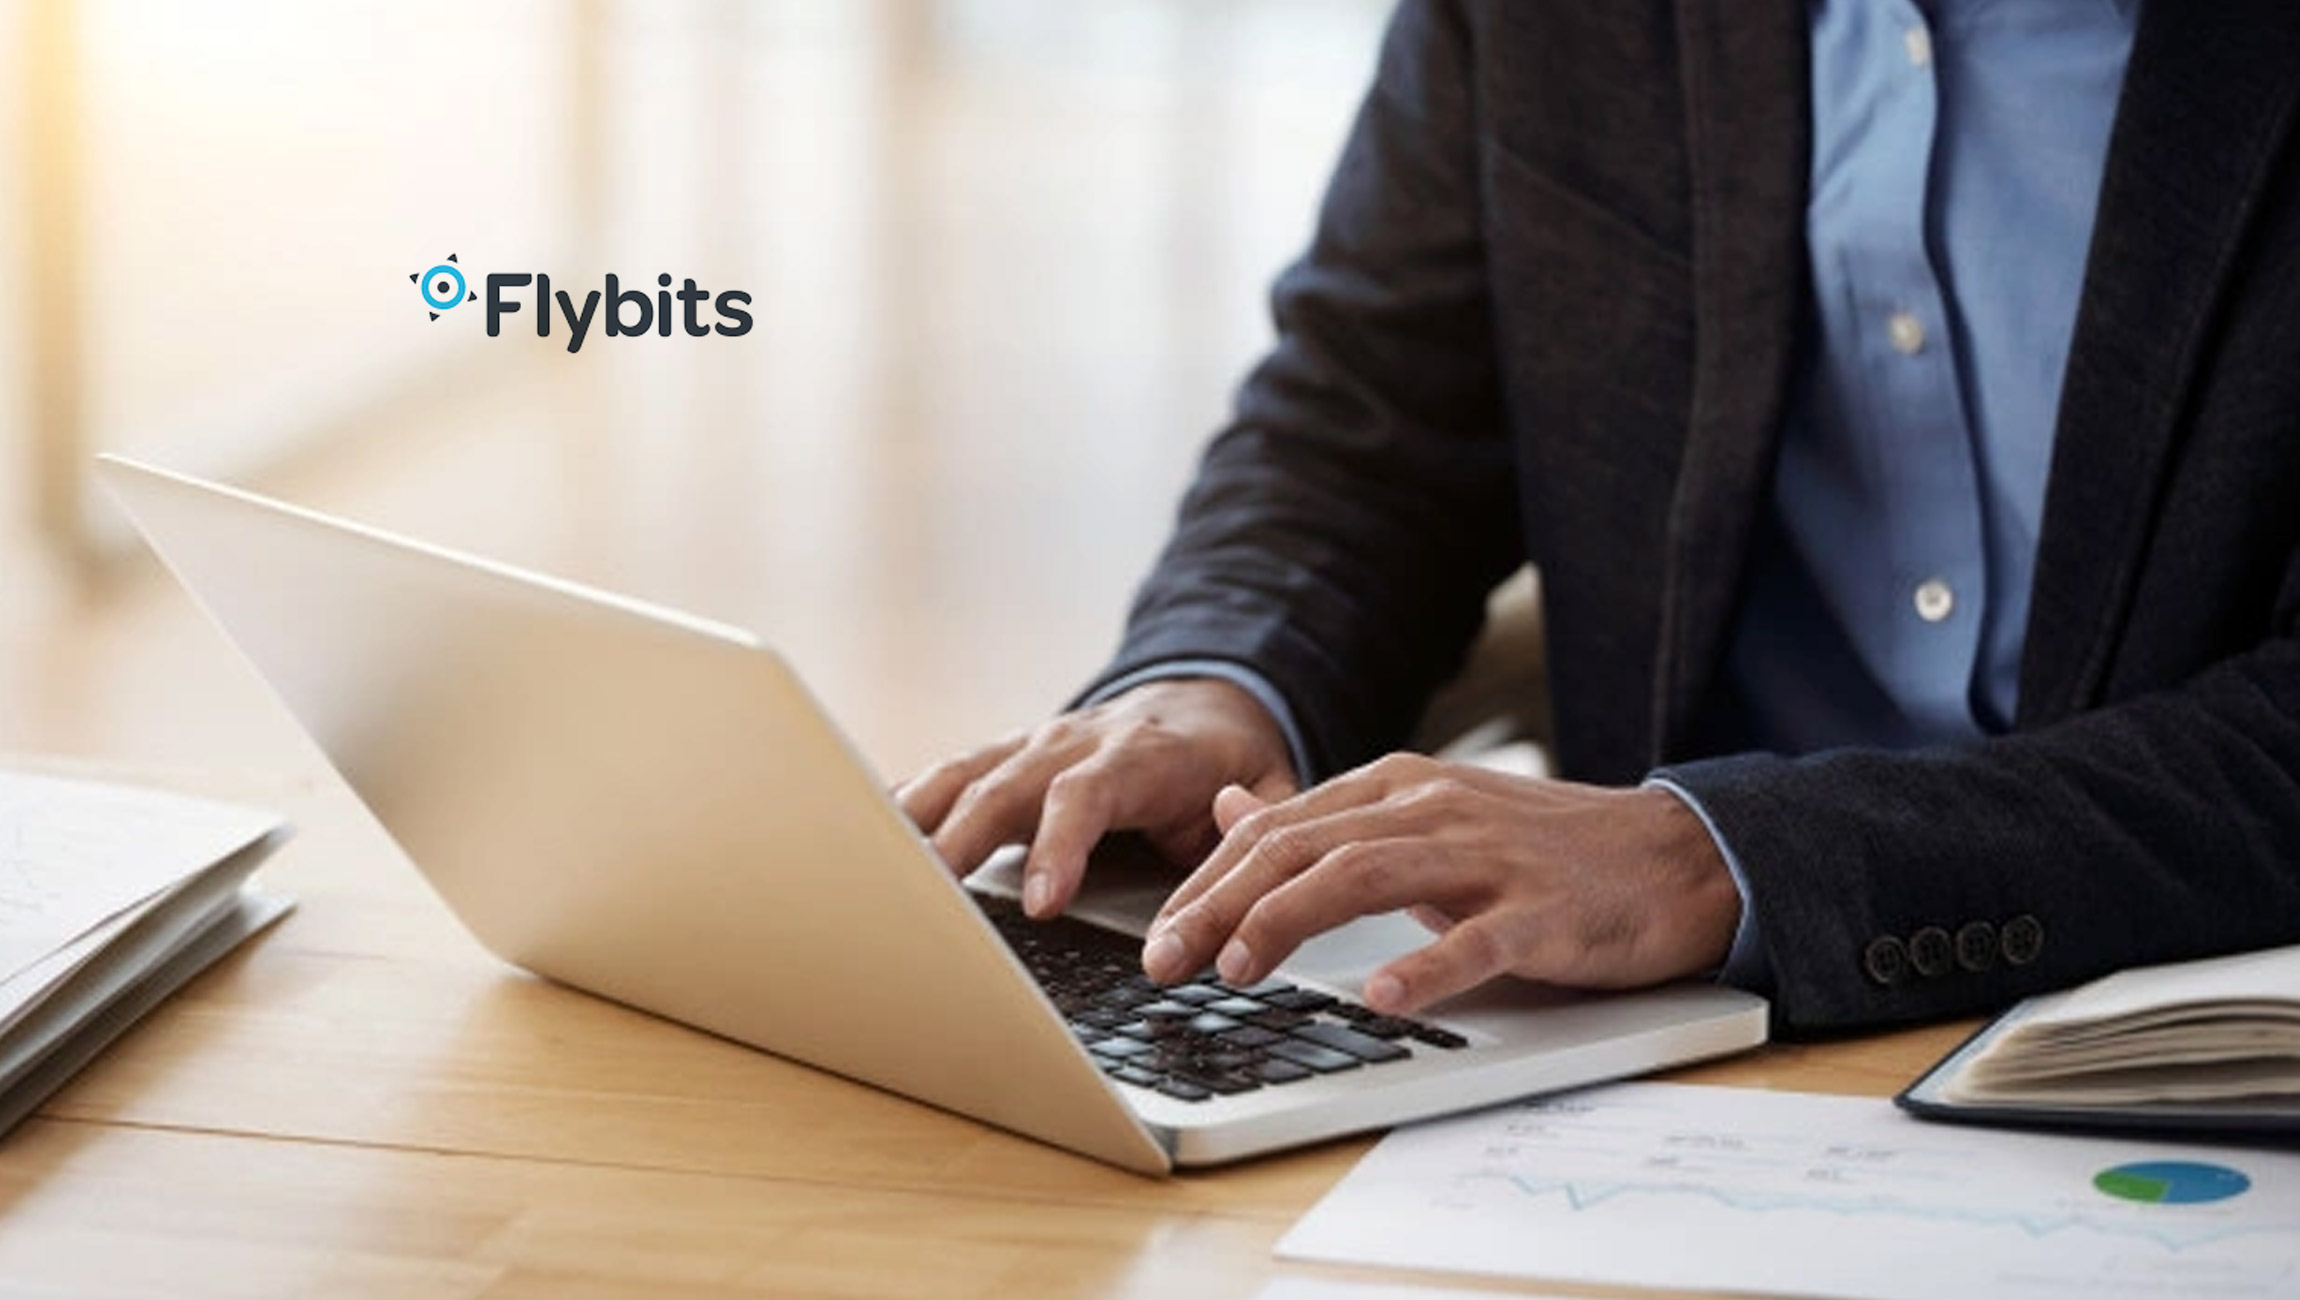 Flybits Advocates Data and Algorithmic Transparency by Putting Consumers in the Driver's Seat With Their Data